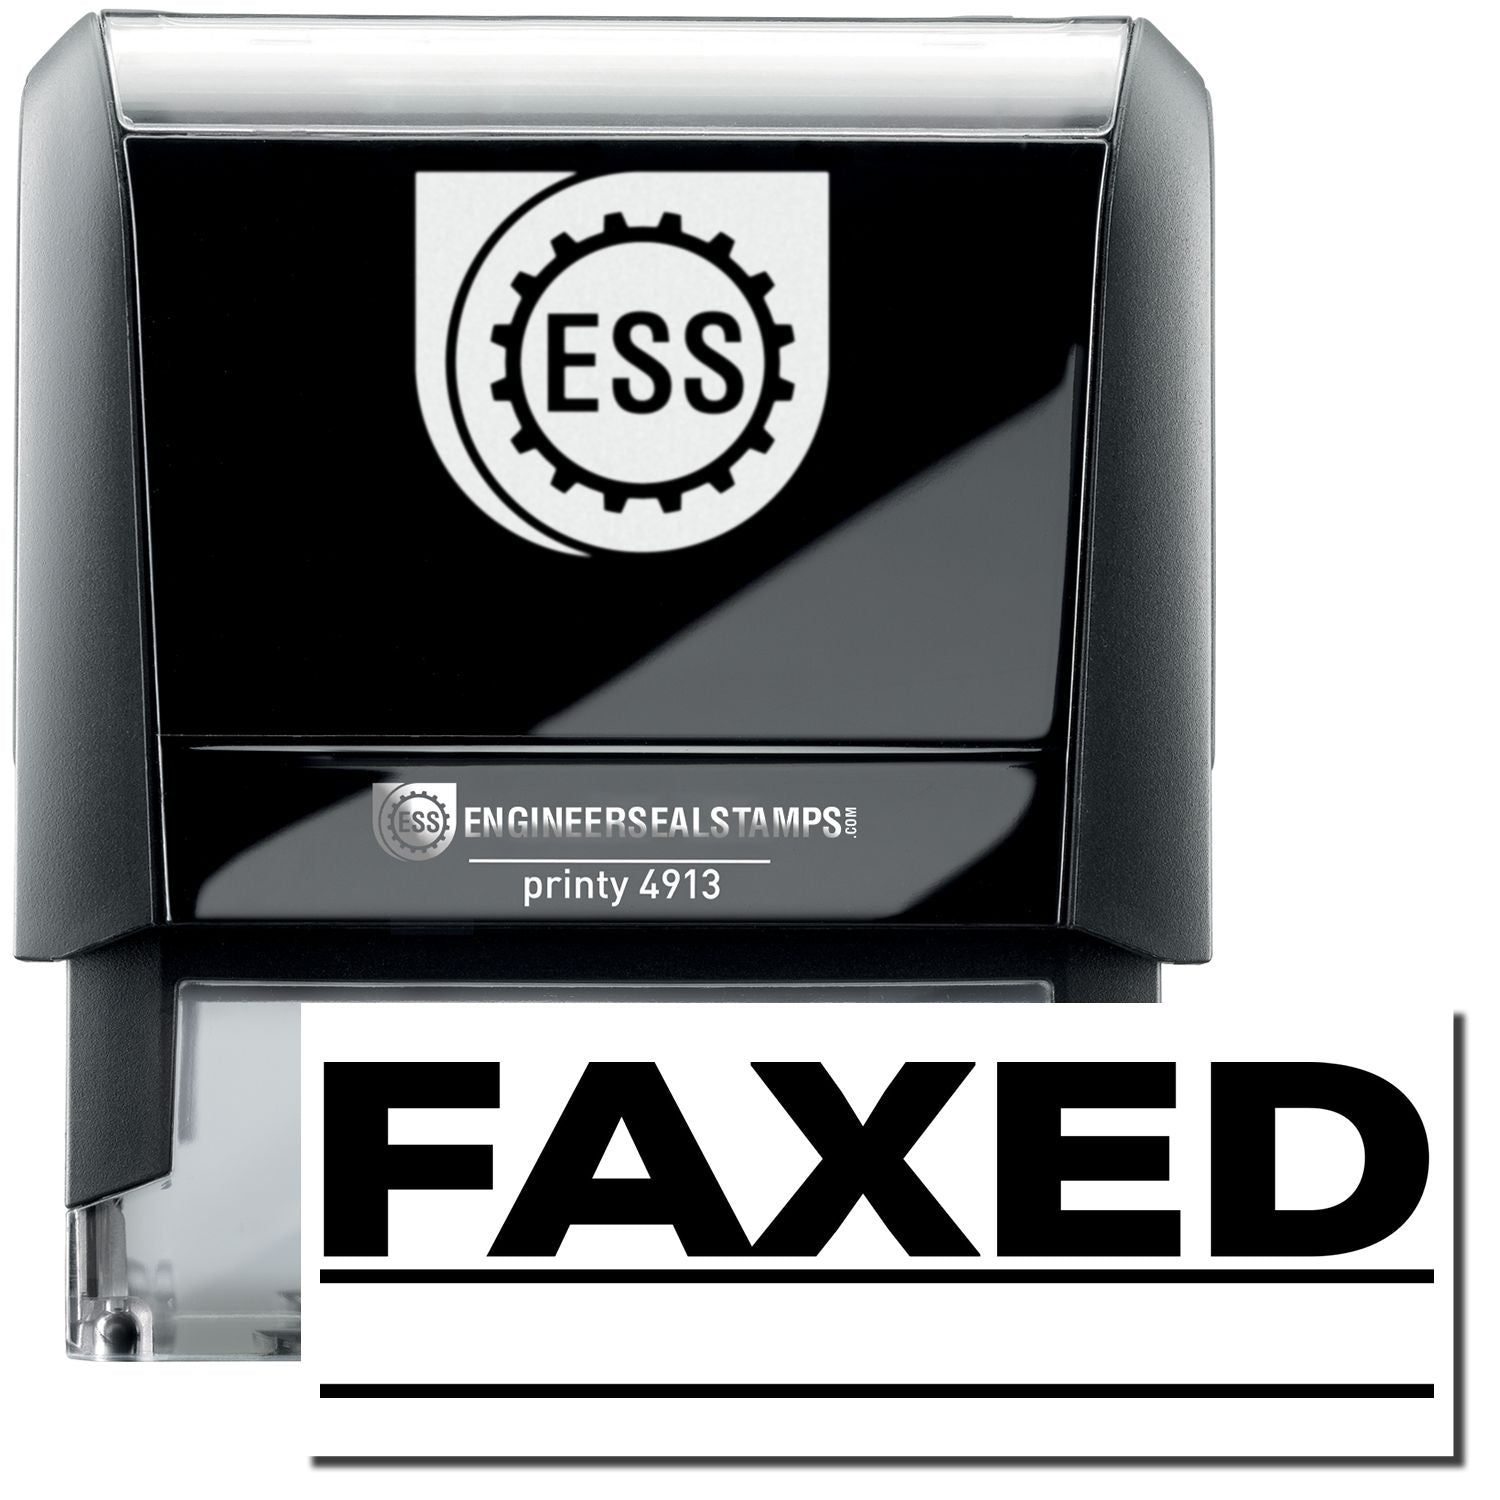 A self-inking stamp with a stamped image showing how the text "FAXED" in a large font with two lines underneath is displayed by it after stamping.